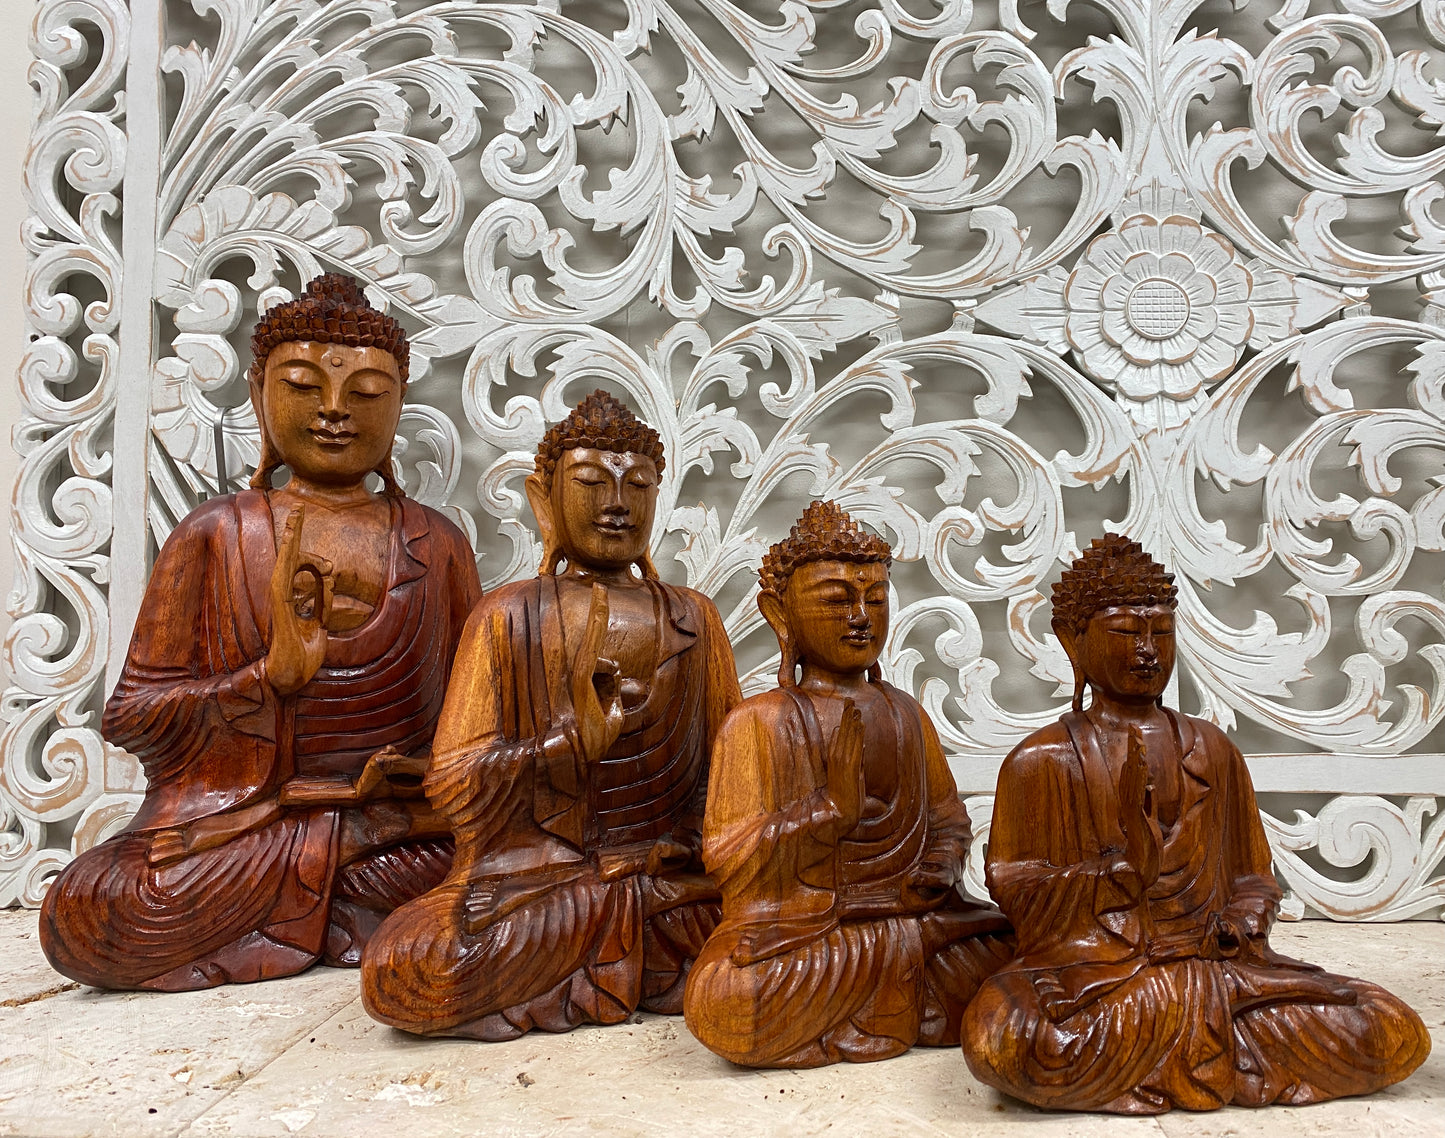 Hand Carved Suar Wood Buddha Statues - Available in 6 Sizes